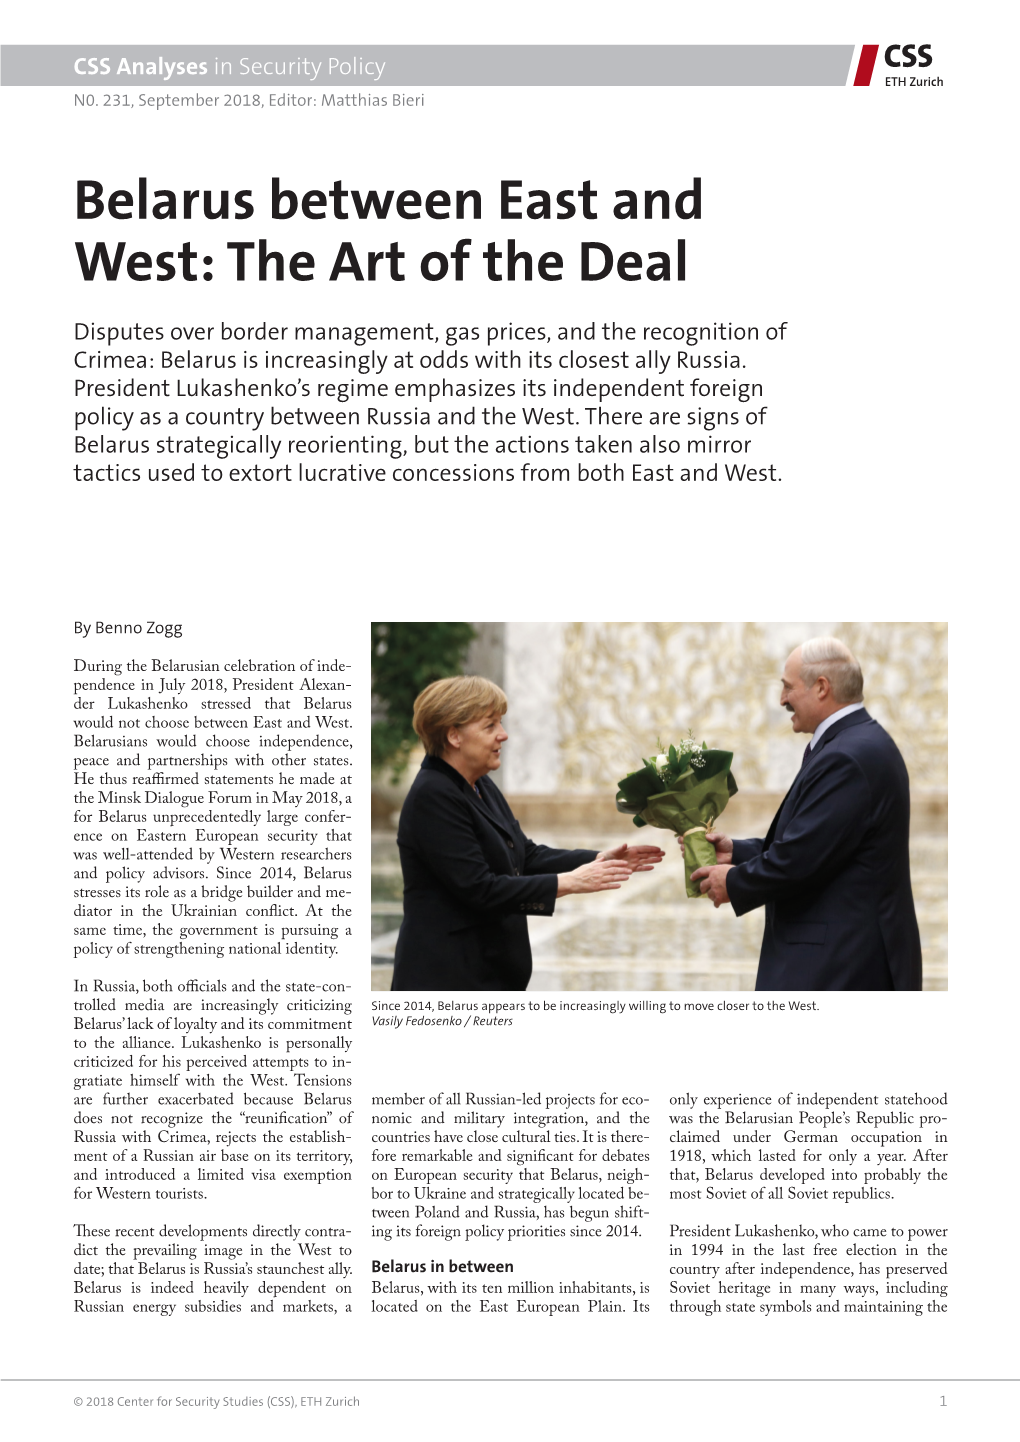 Belarus Between East and West: the Art of the Deal